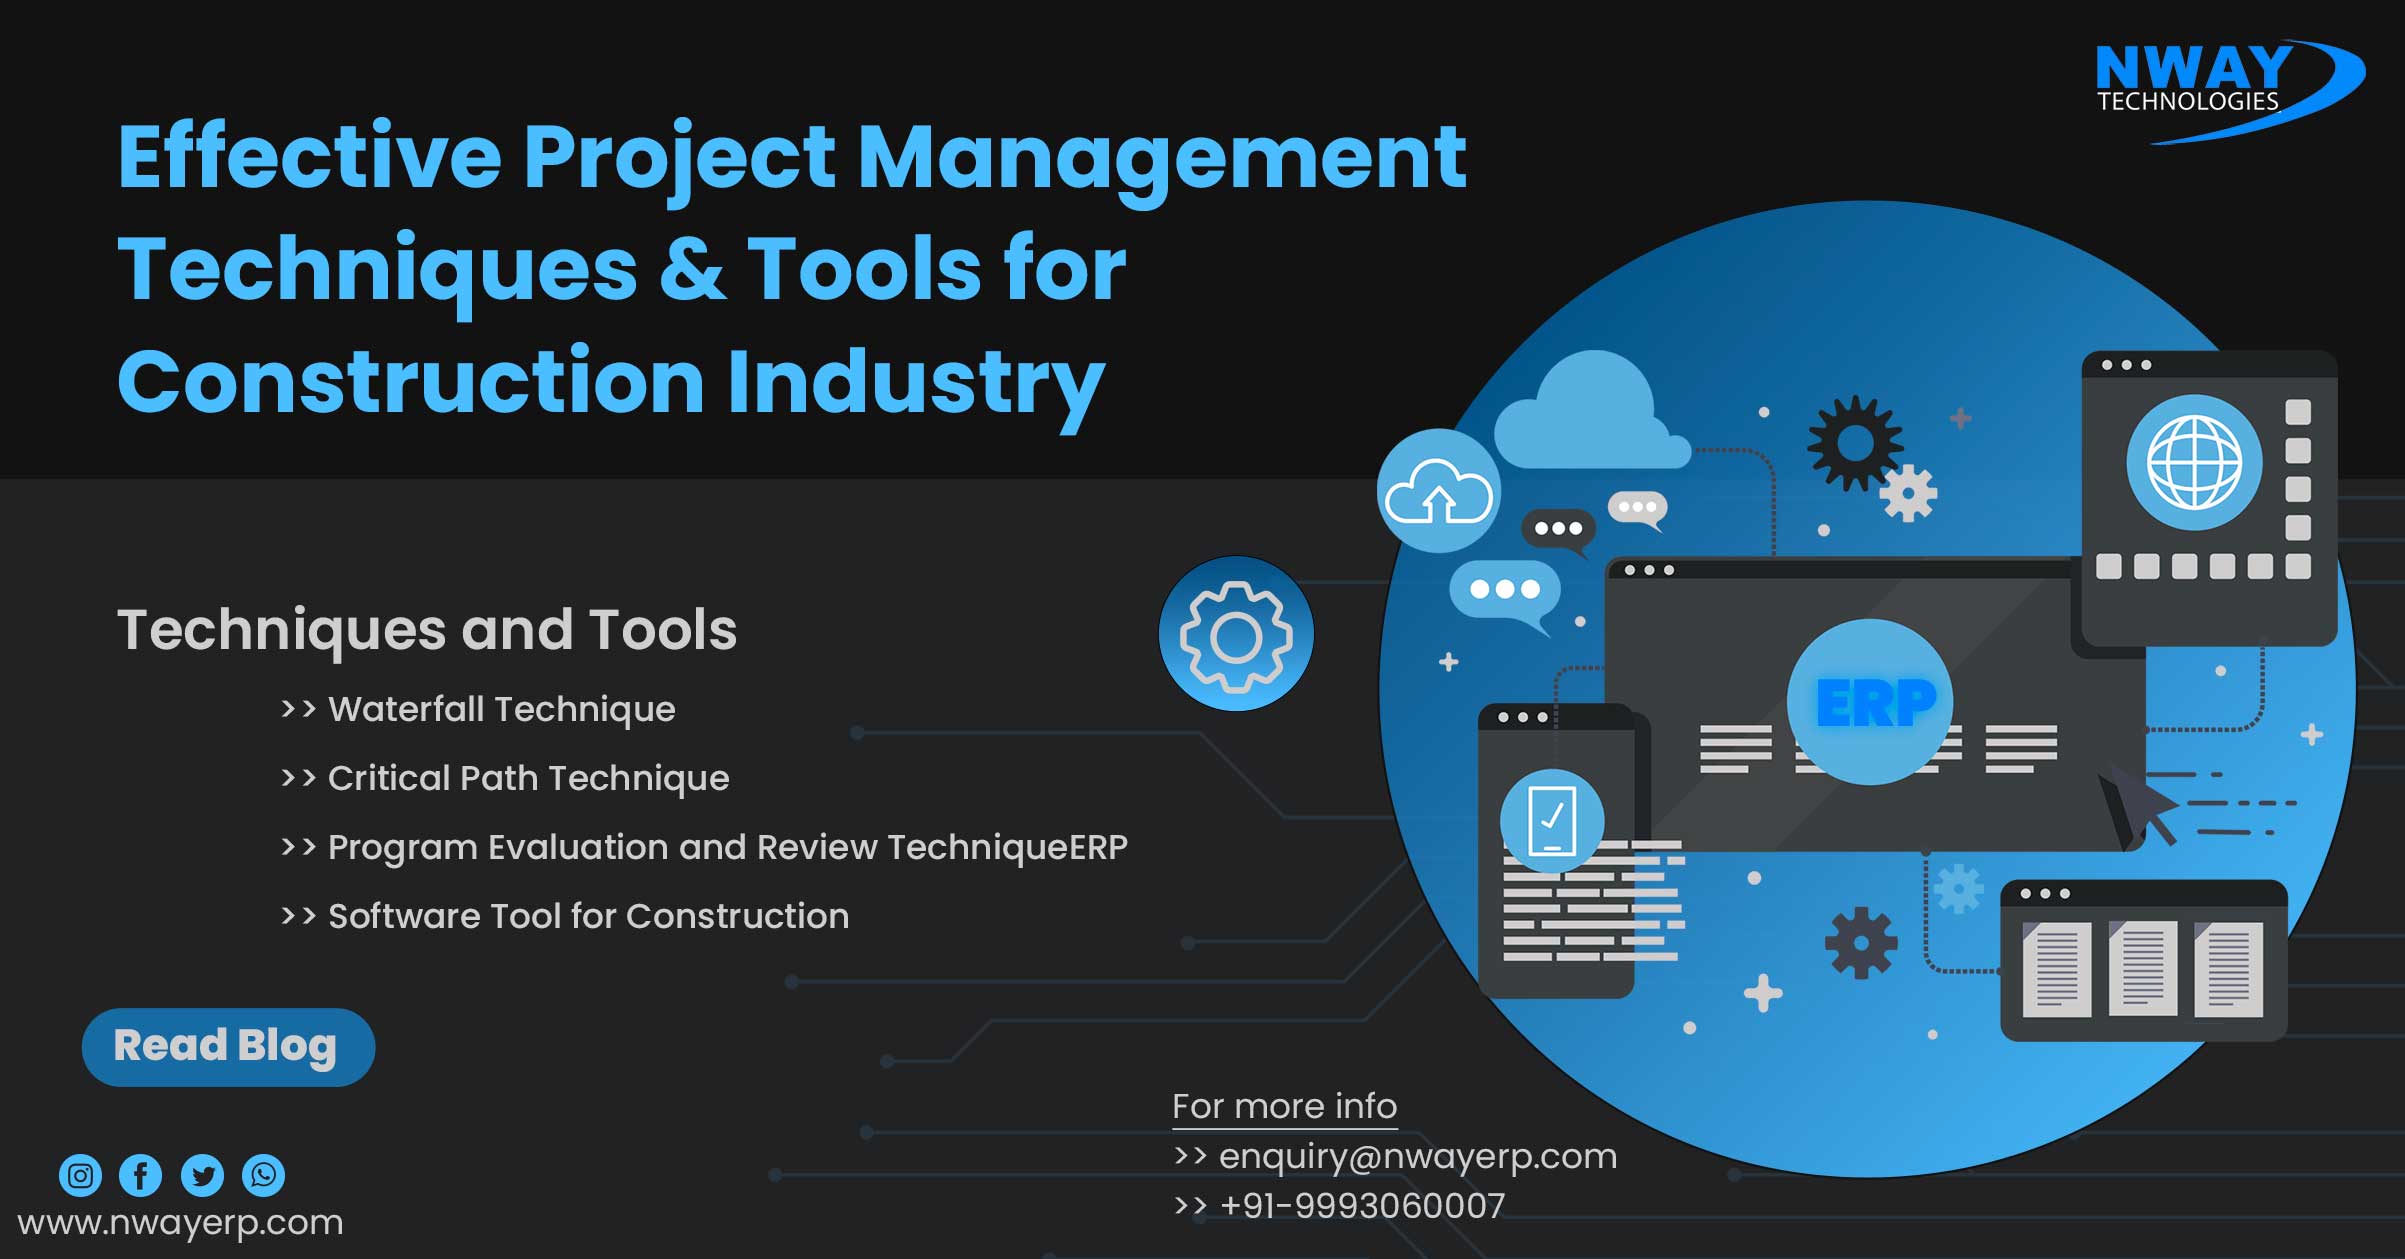 What are Effective Project Management techniques & tools for Construction Industry